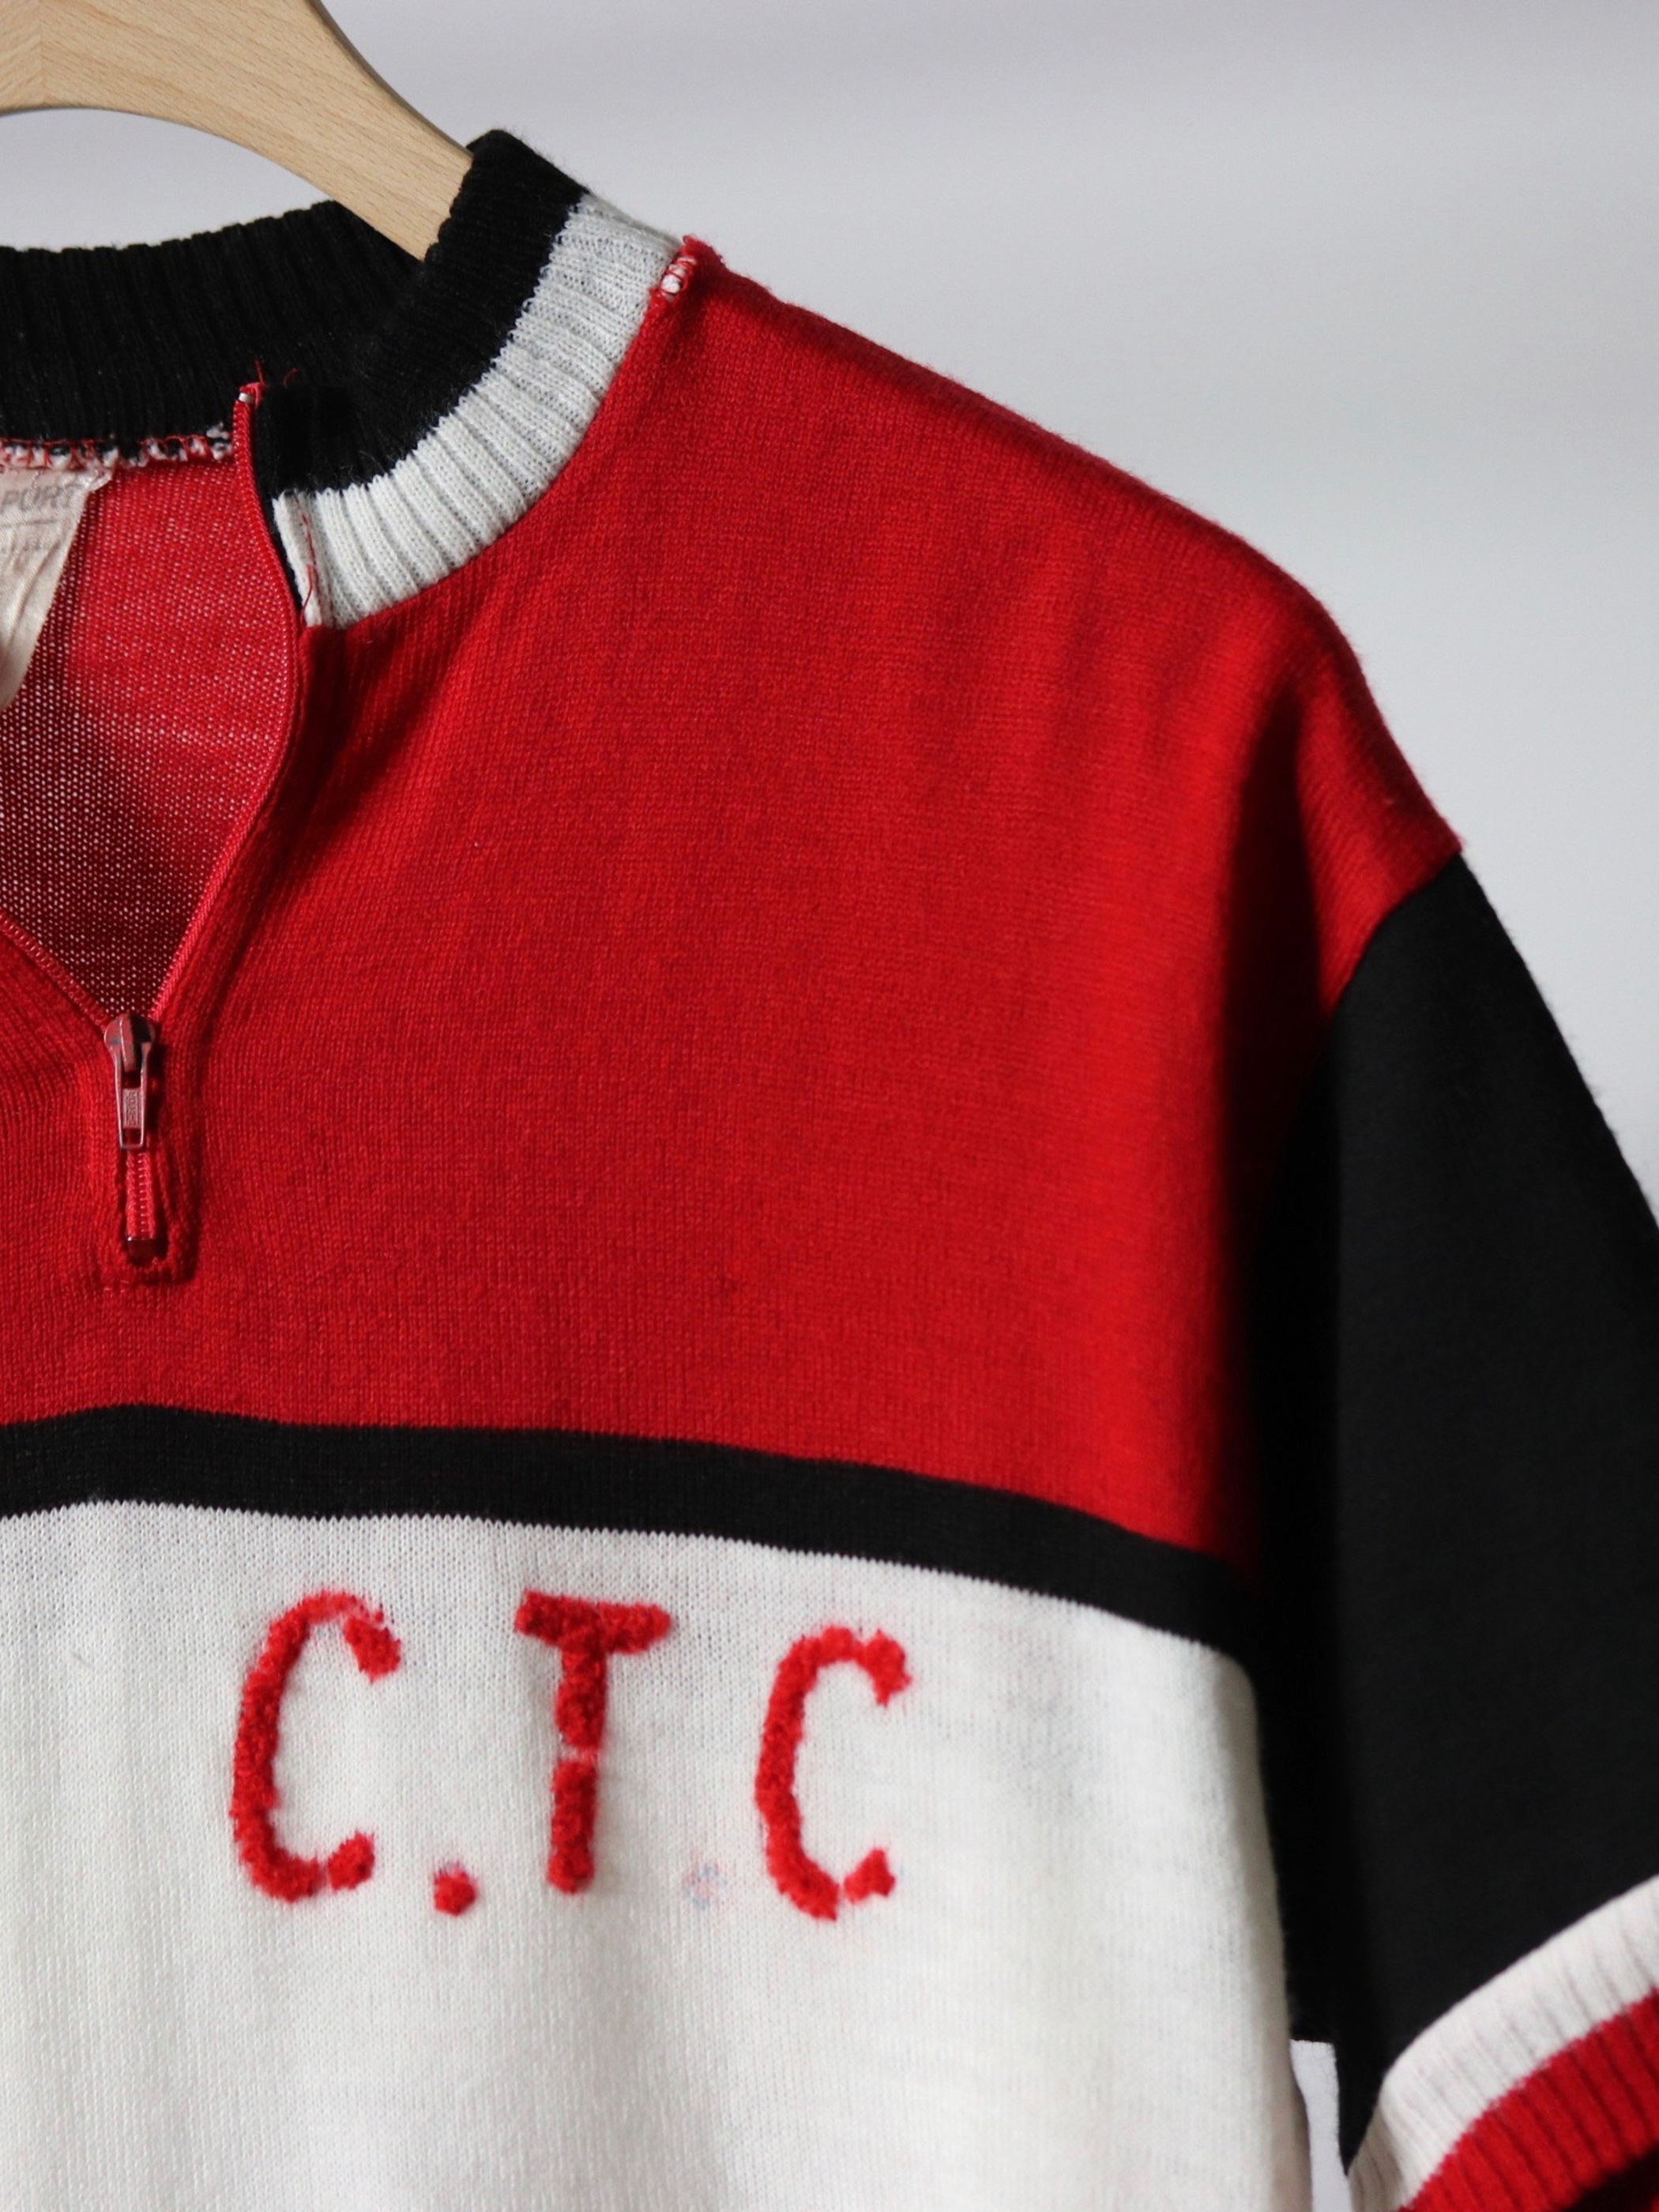 70's C.T.C cycling tops